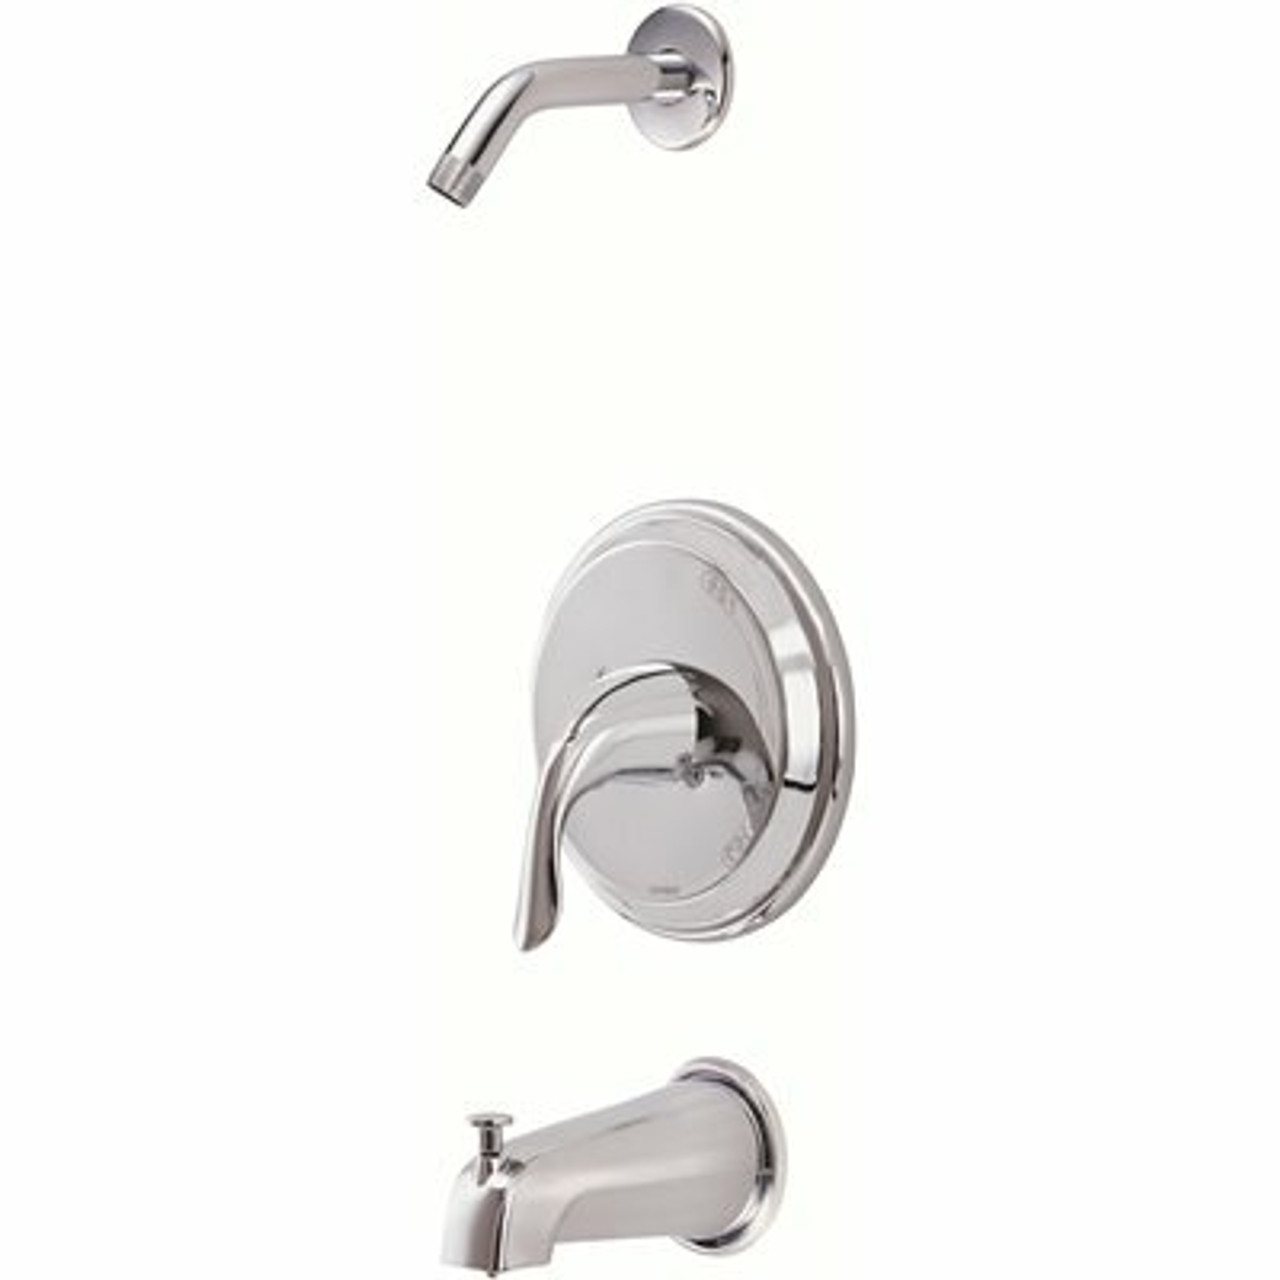 Gerber Viper 1-Handle Tub And Shower Trim Kit In Chrome Without Showerhead With Treysta Cartridge (Valve Not Included)